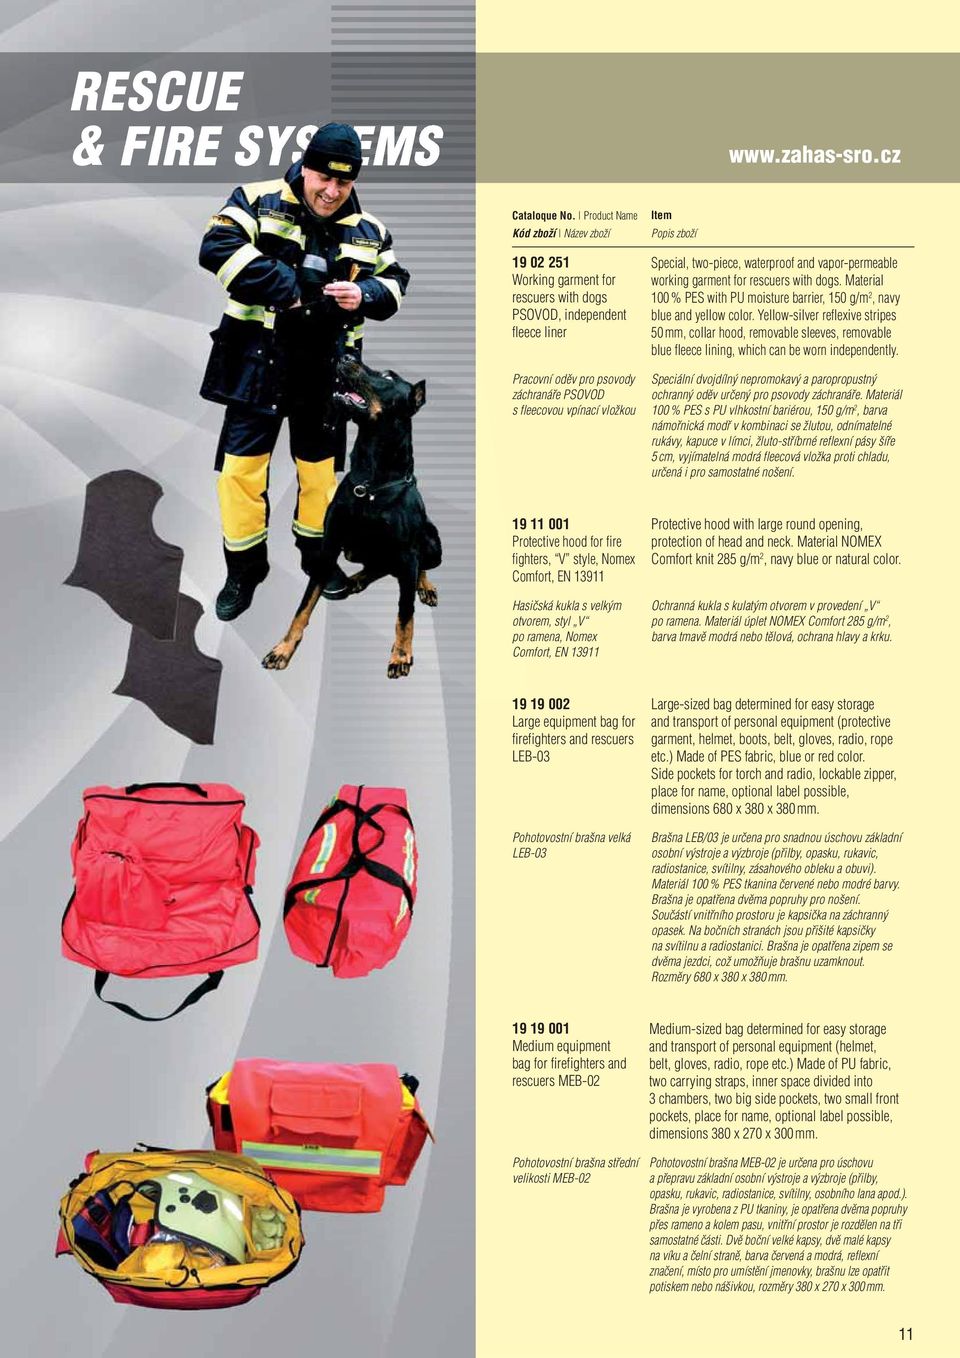 vapor-permeable working garment for rescuers with dogs. Material 100 % PES with PU moisture barrier, 150 g/m 2, navy blue and yellow color.